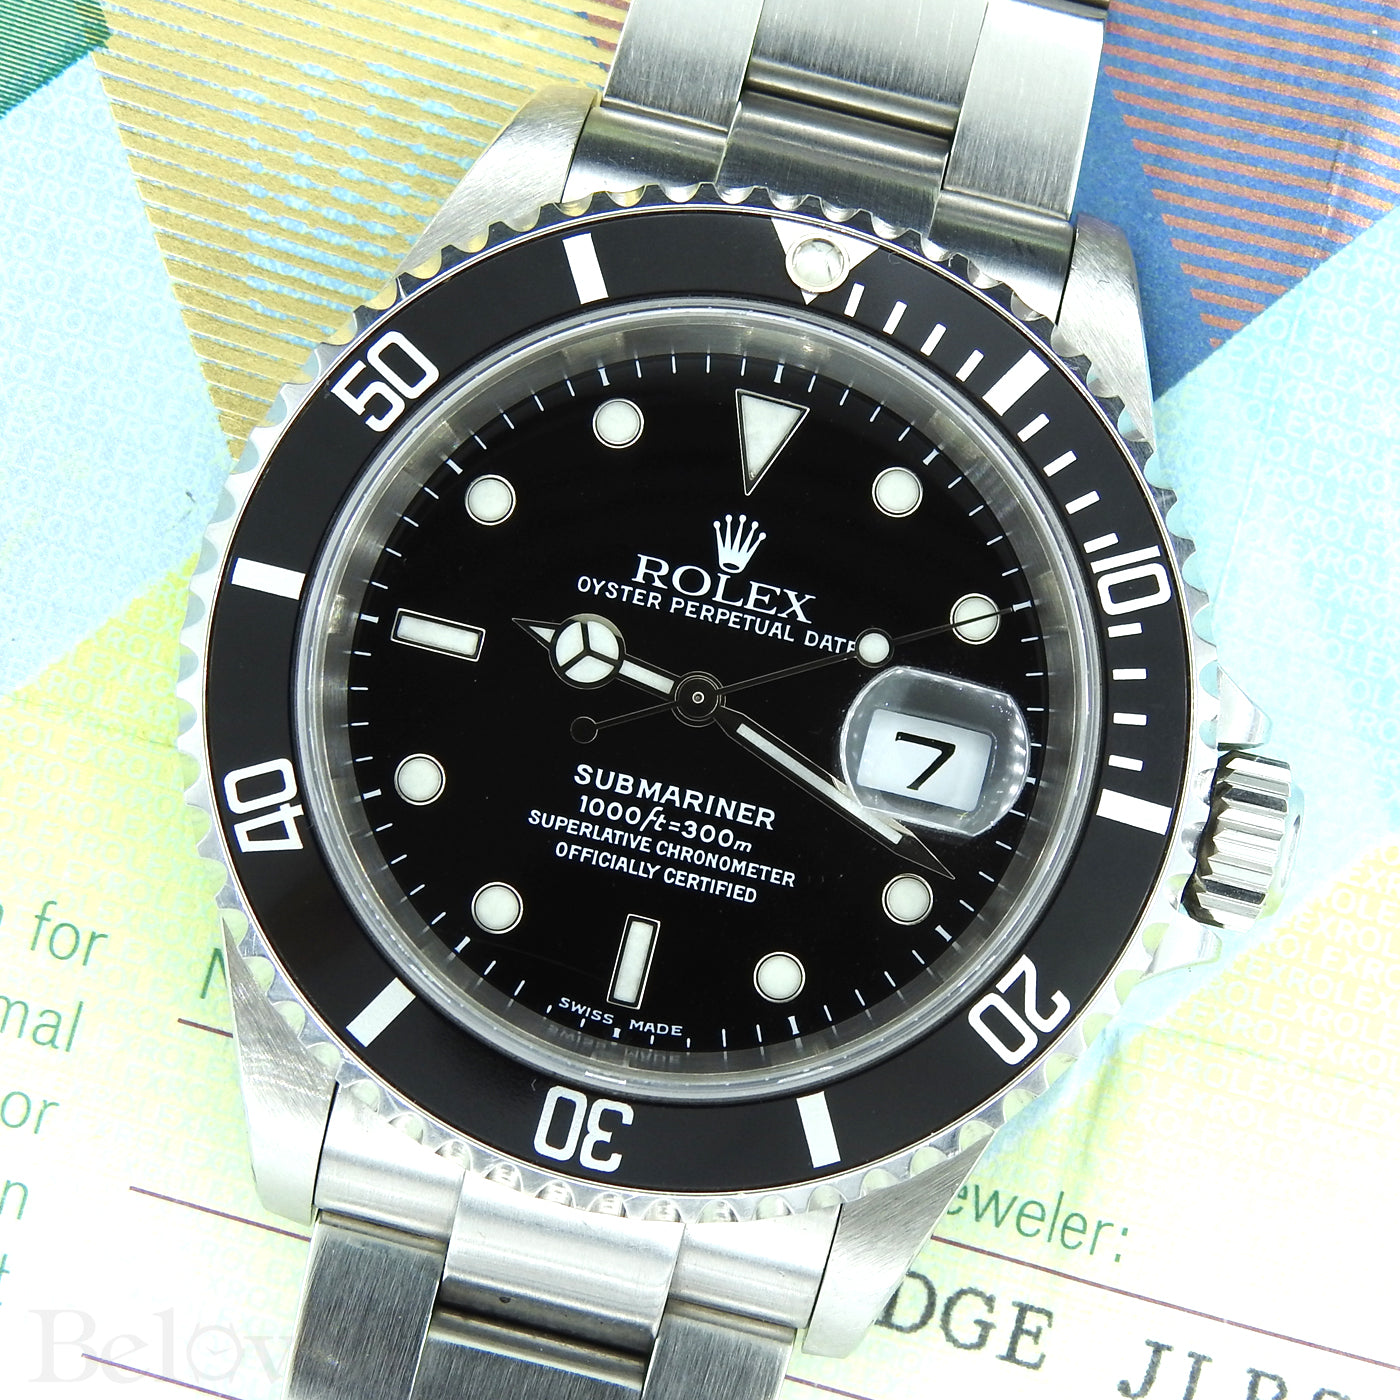 Rolex Submariner 16610 Complete with Rolex One-Year Warranty Paper and Rolex Box Image 6